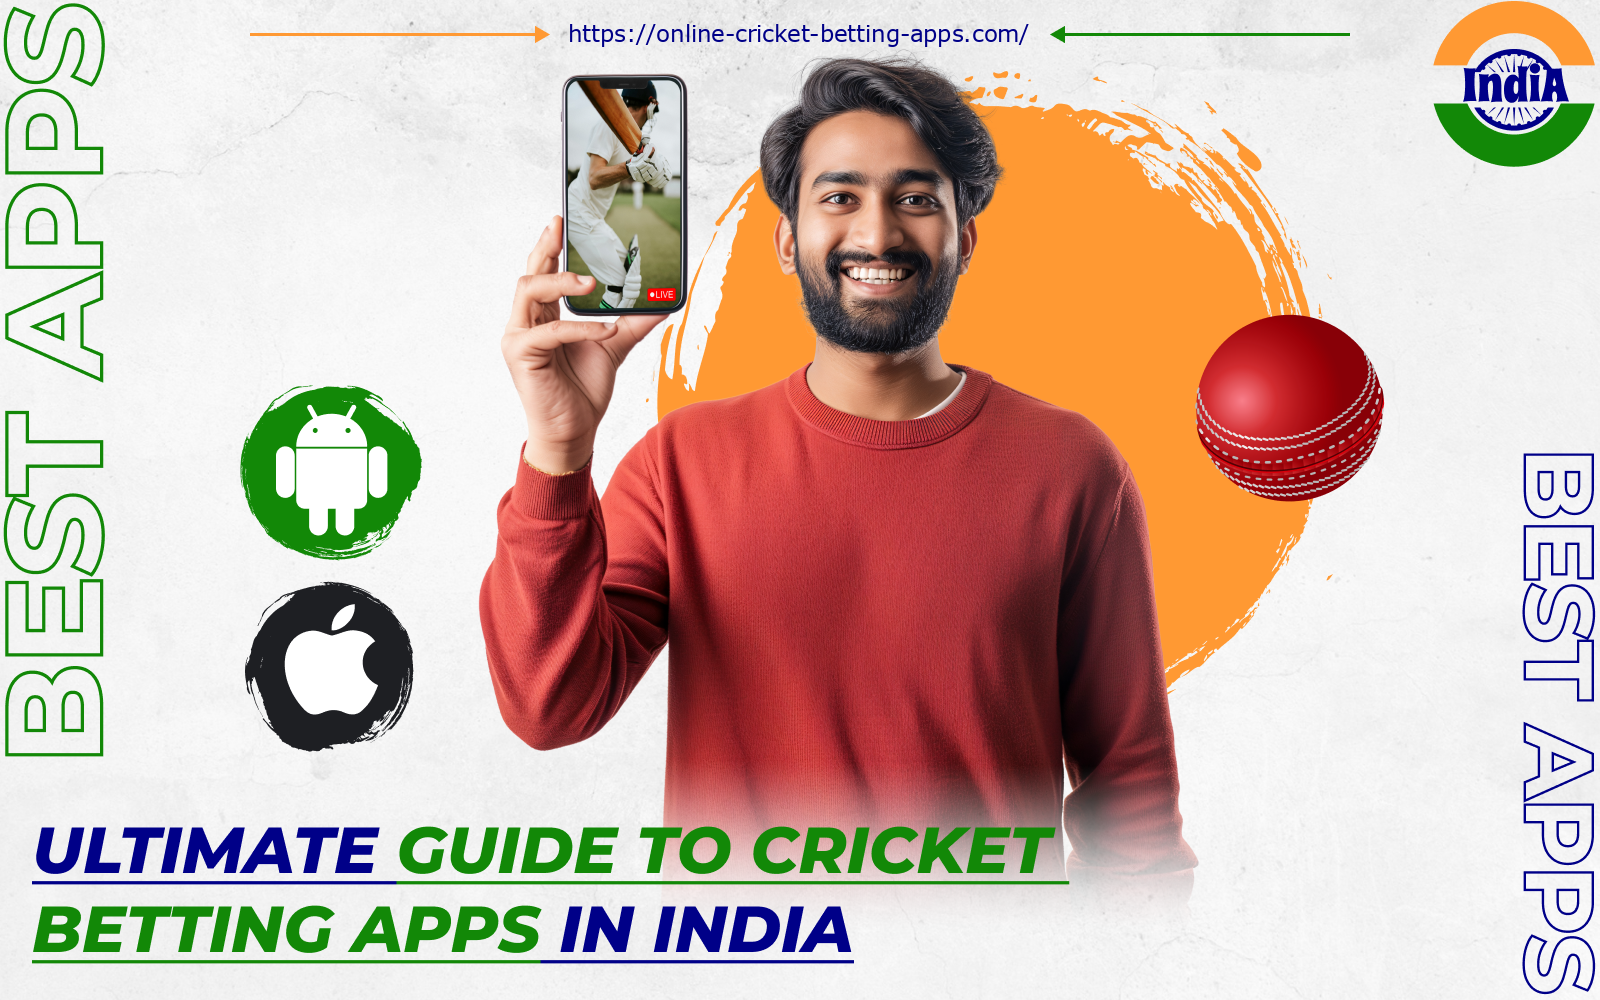 Cricket betting apps have now become one of the most popular ways for Indian fans to not only increase their viewership but also try to predict the outcome of a match, turning their knowledge into real profits